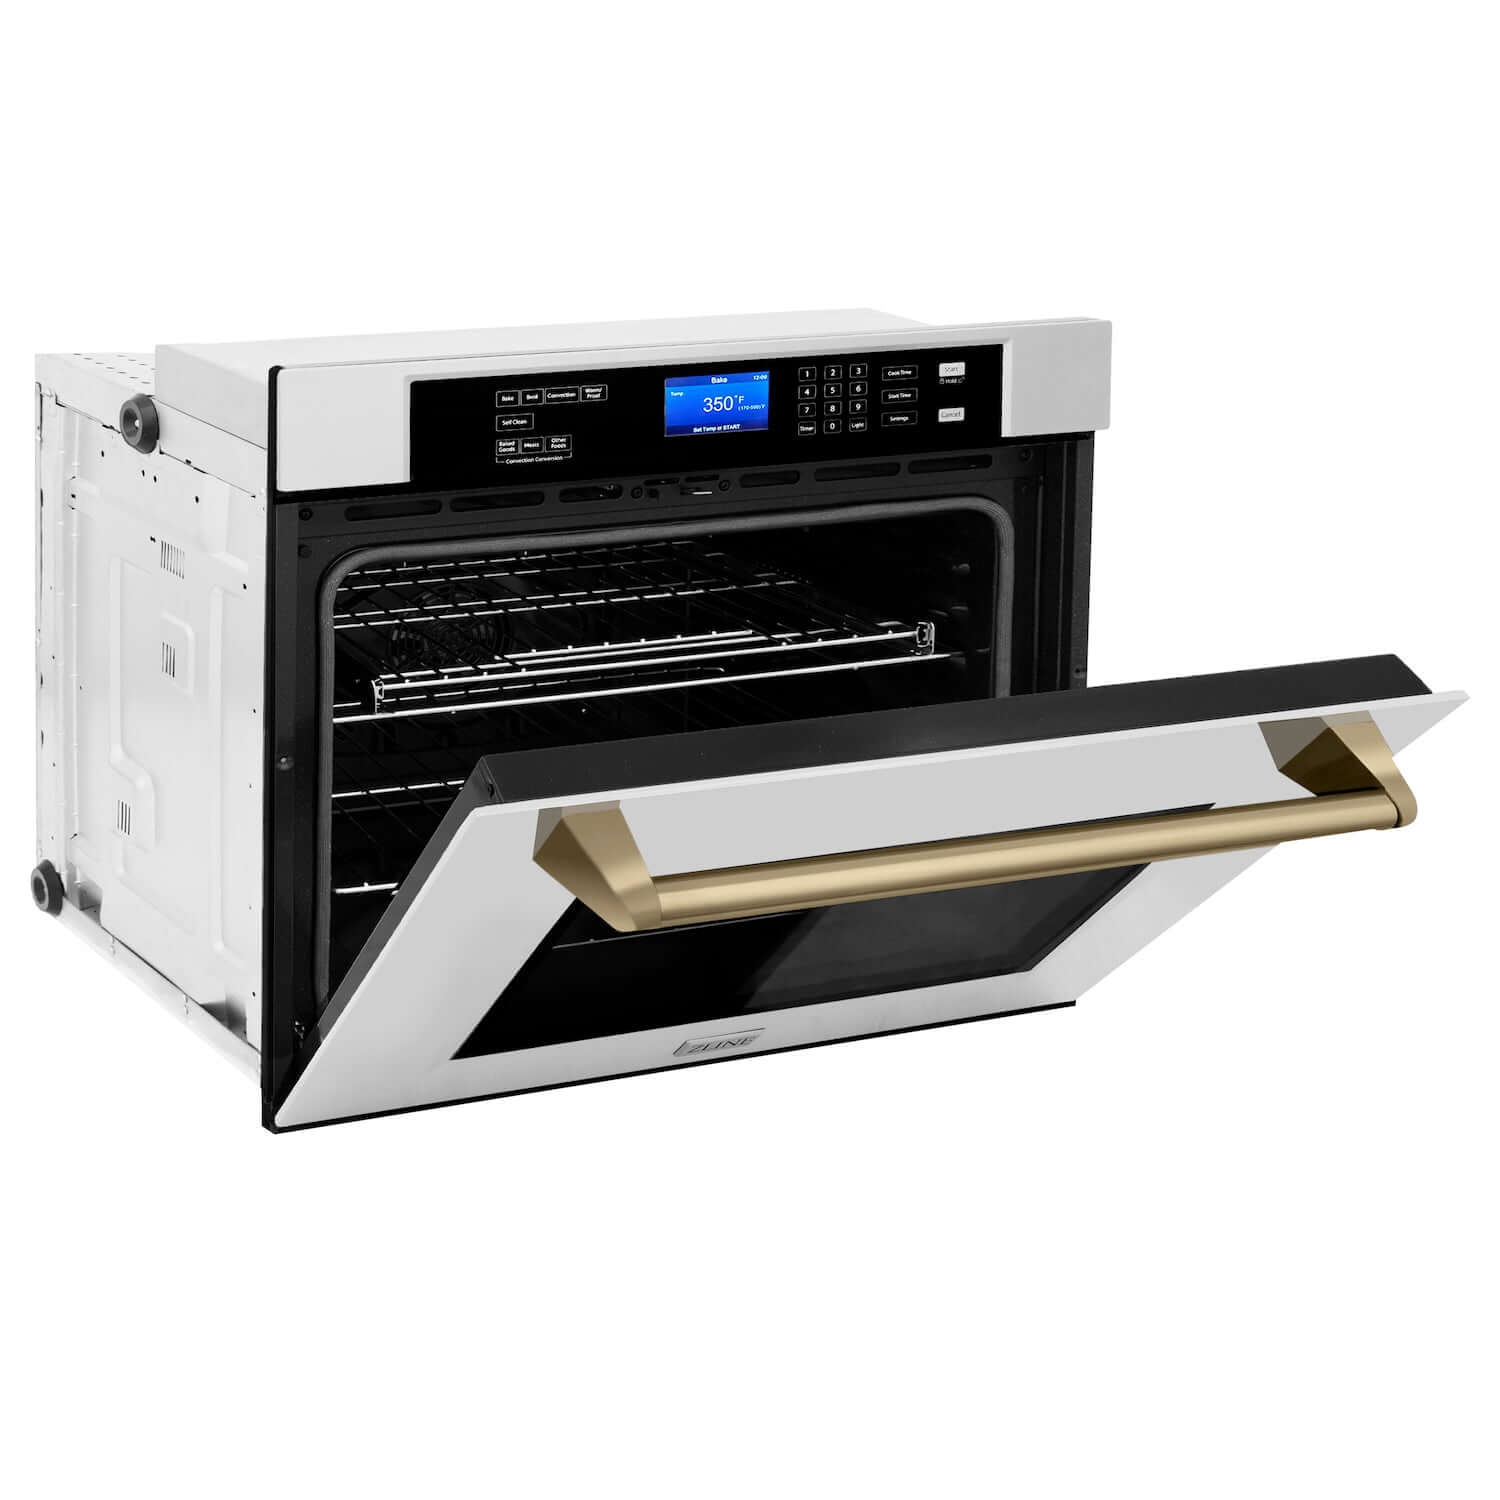 ZLINE Autograph Edition 30 in. Electric Single Wall Oven with Self Clean and True Convection in Stainless Steel and Champagne Bronze Accents (AWSZ-30-CB) side, half open.